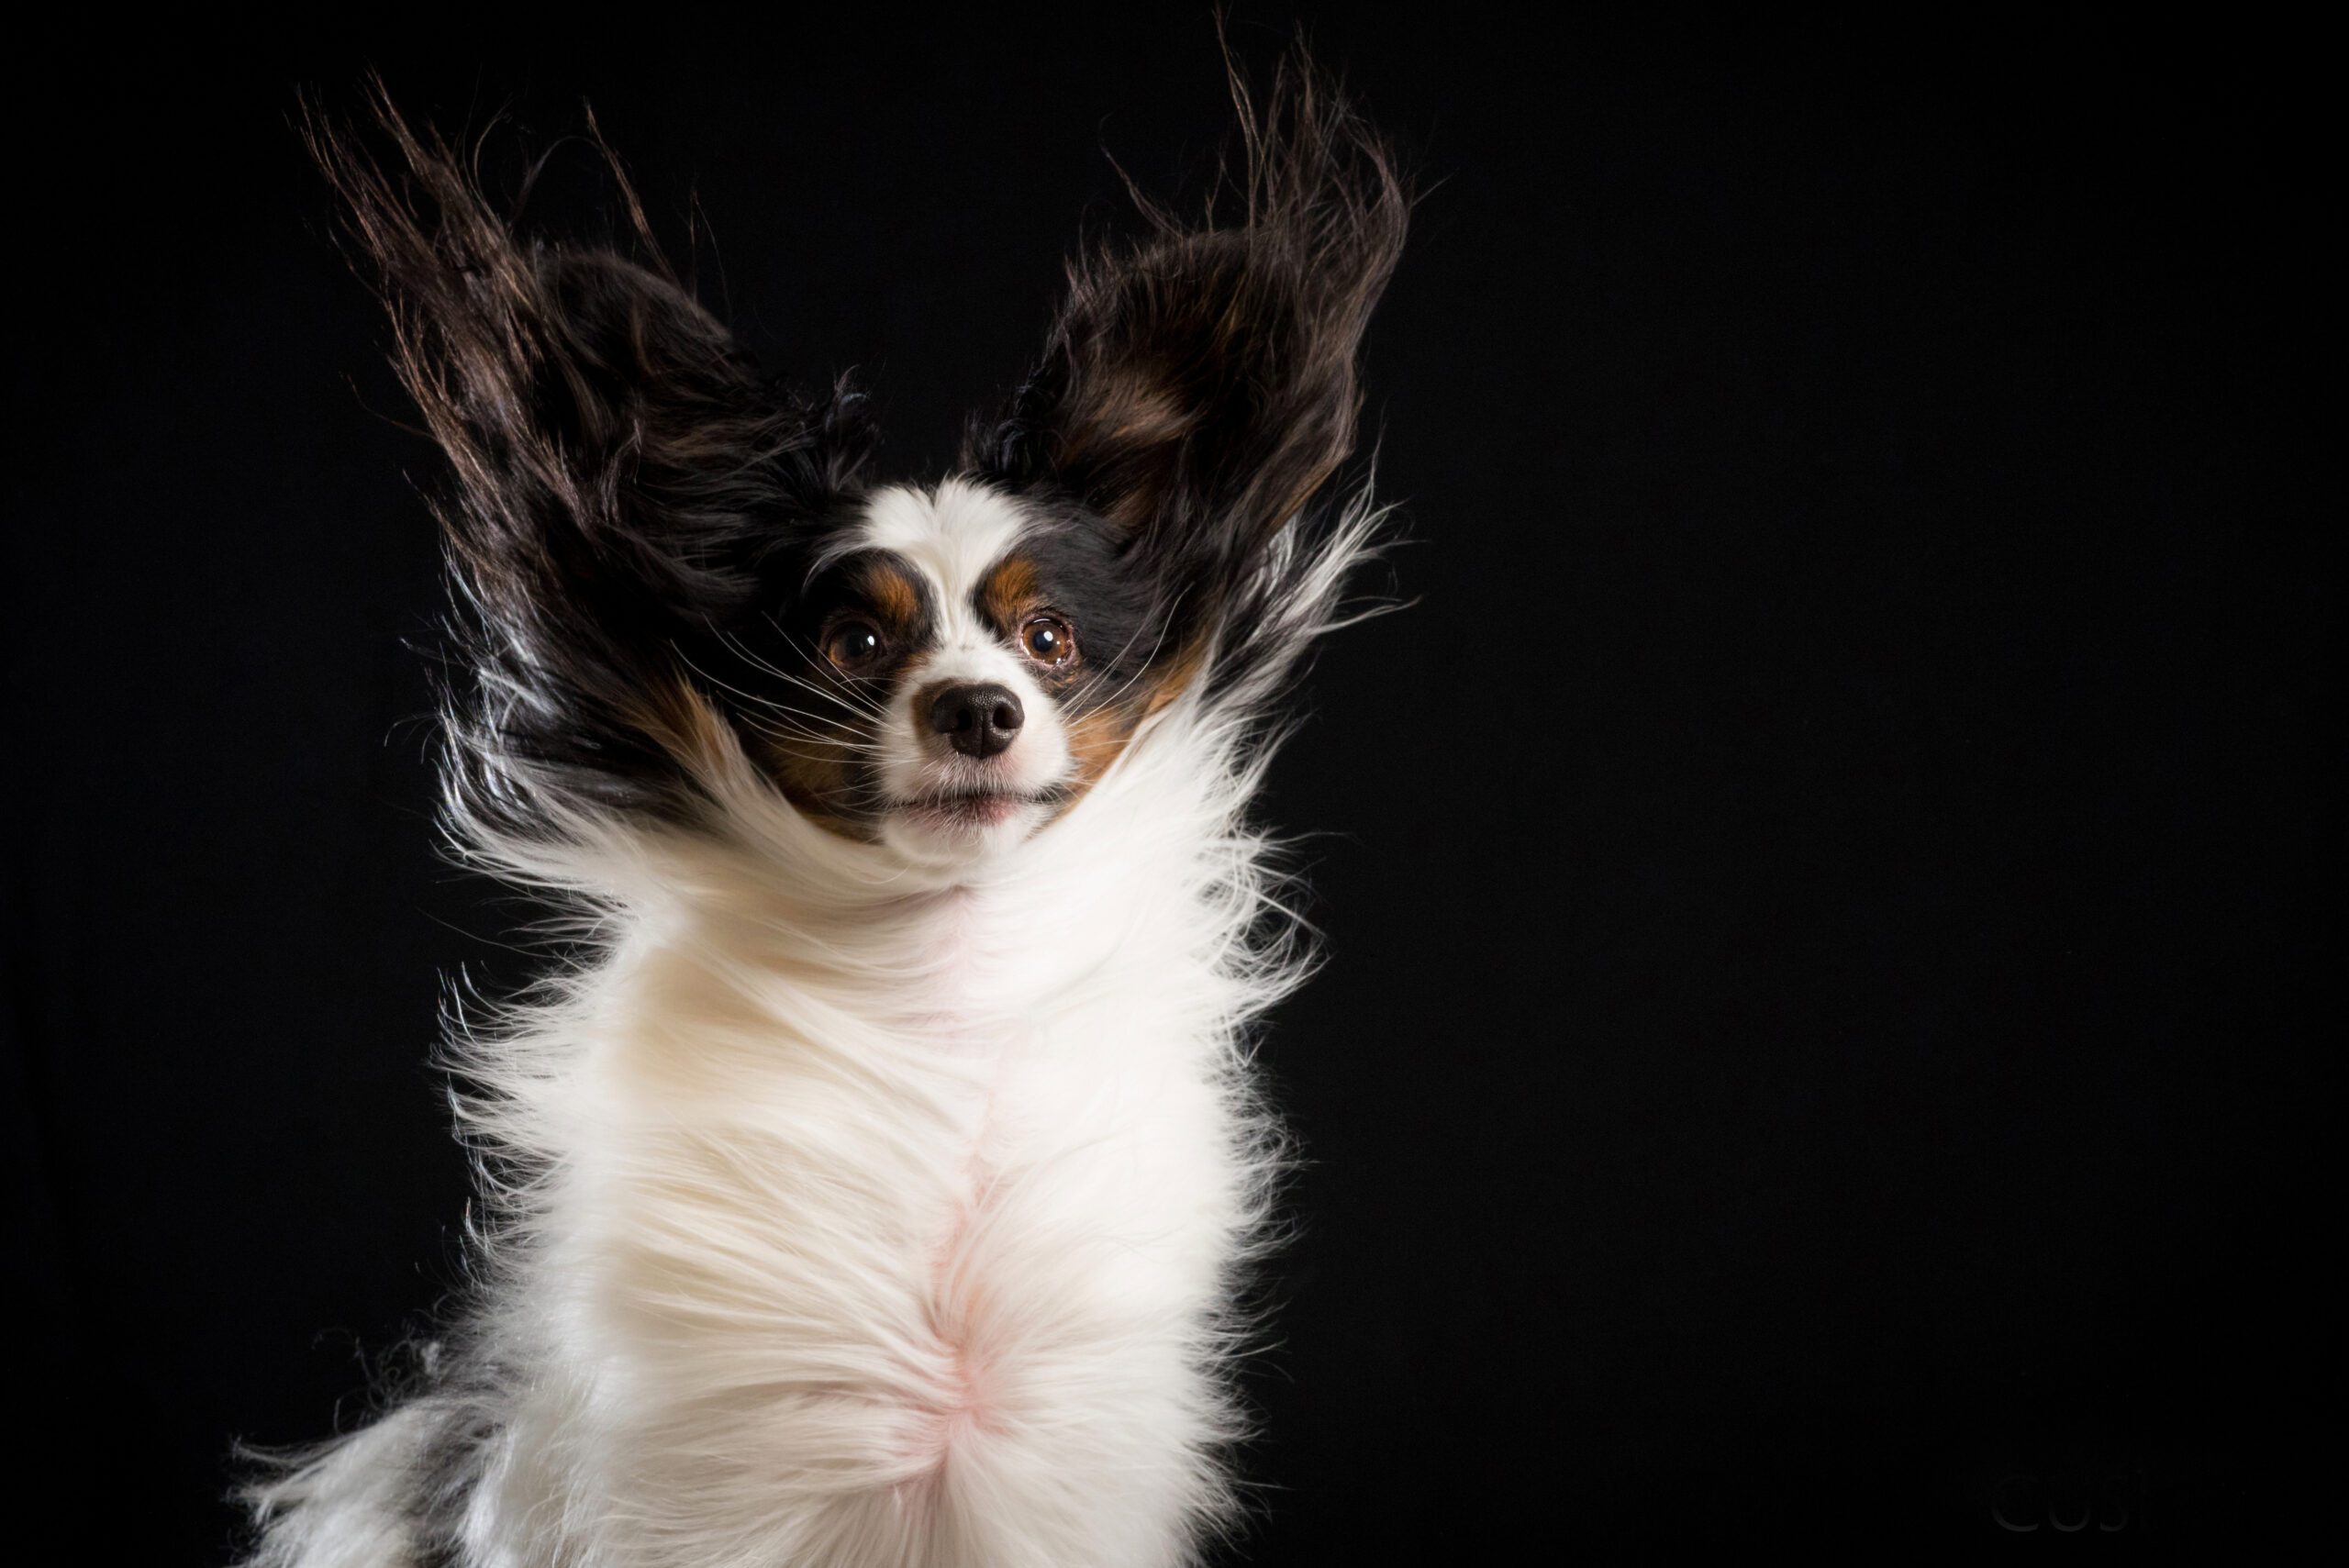 fluffy white and brown dog wind blown in Windy Paws dog portrait photography series by Candice C. Cusic Photography, based in Chicago